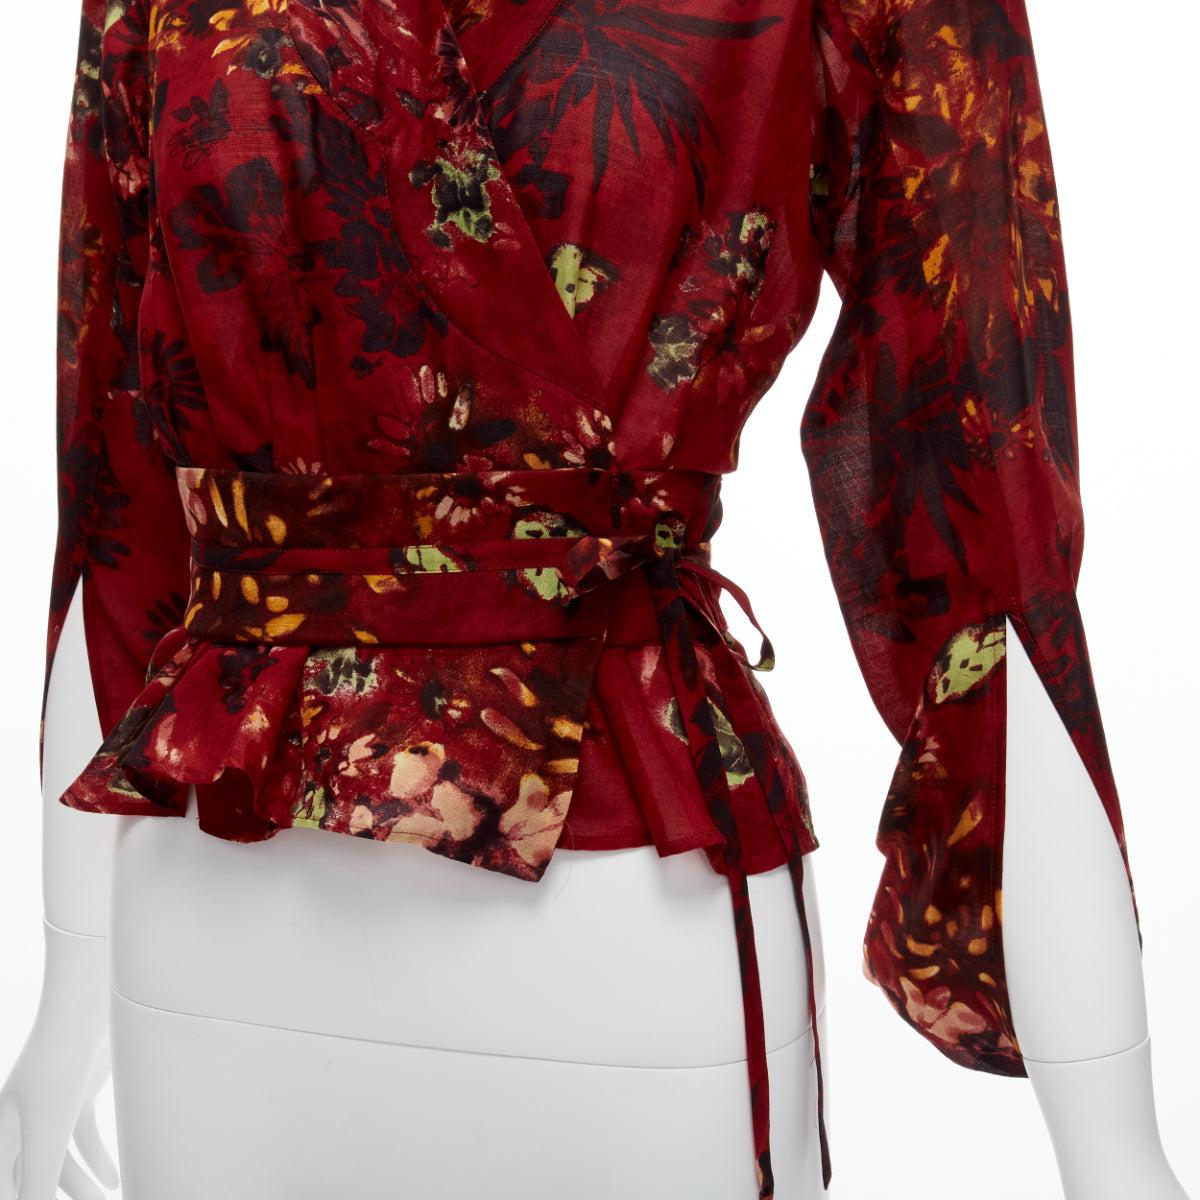 KENZO Vintage red floral silk wool kimono sleeves wrap tie top FR36 S
Reference: TGAS/D00513
Brand: Kenzo
Material: Silk, Wool
Color: Red
Pattern: Floral
Closure: Wrap Tie
Extra Details: Wrap tie. Kimono sleeves. Peplum cut.
Made in: